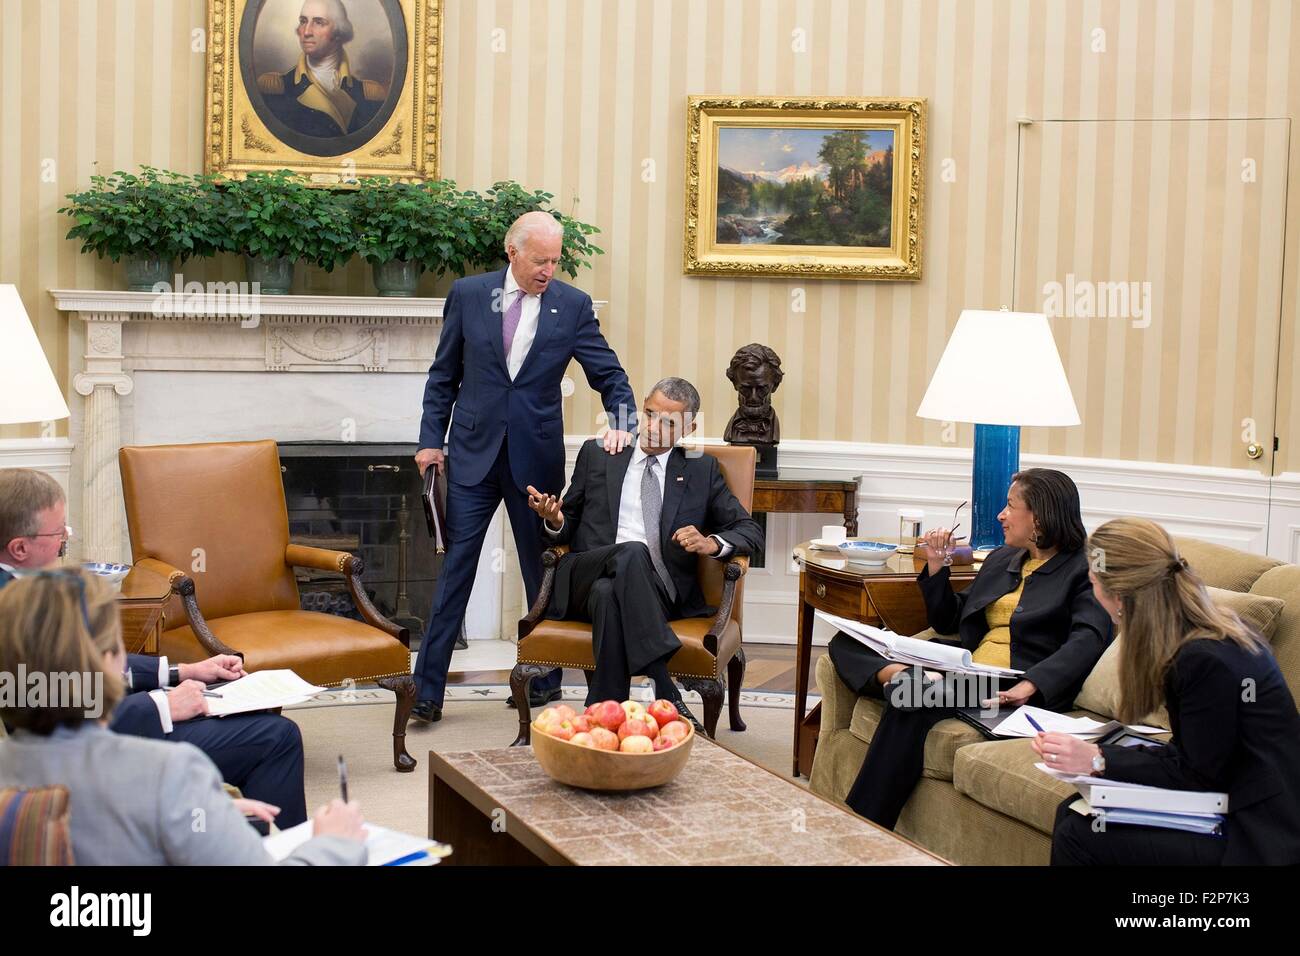 U.S. President Barack Obama is congratulated by Vice President Joe Biden in the Oval Office of the White House after the Supreme Court ruled in favor of the Affordable Care Act June 25, 2015 in Washington, DC. Stock Photo